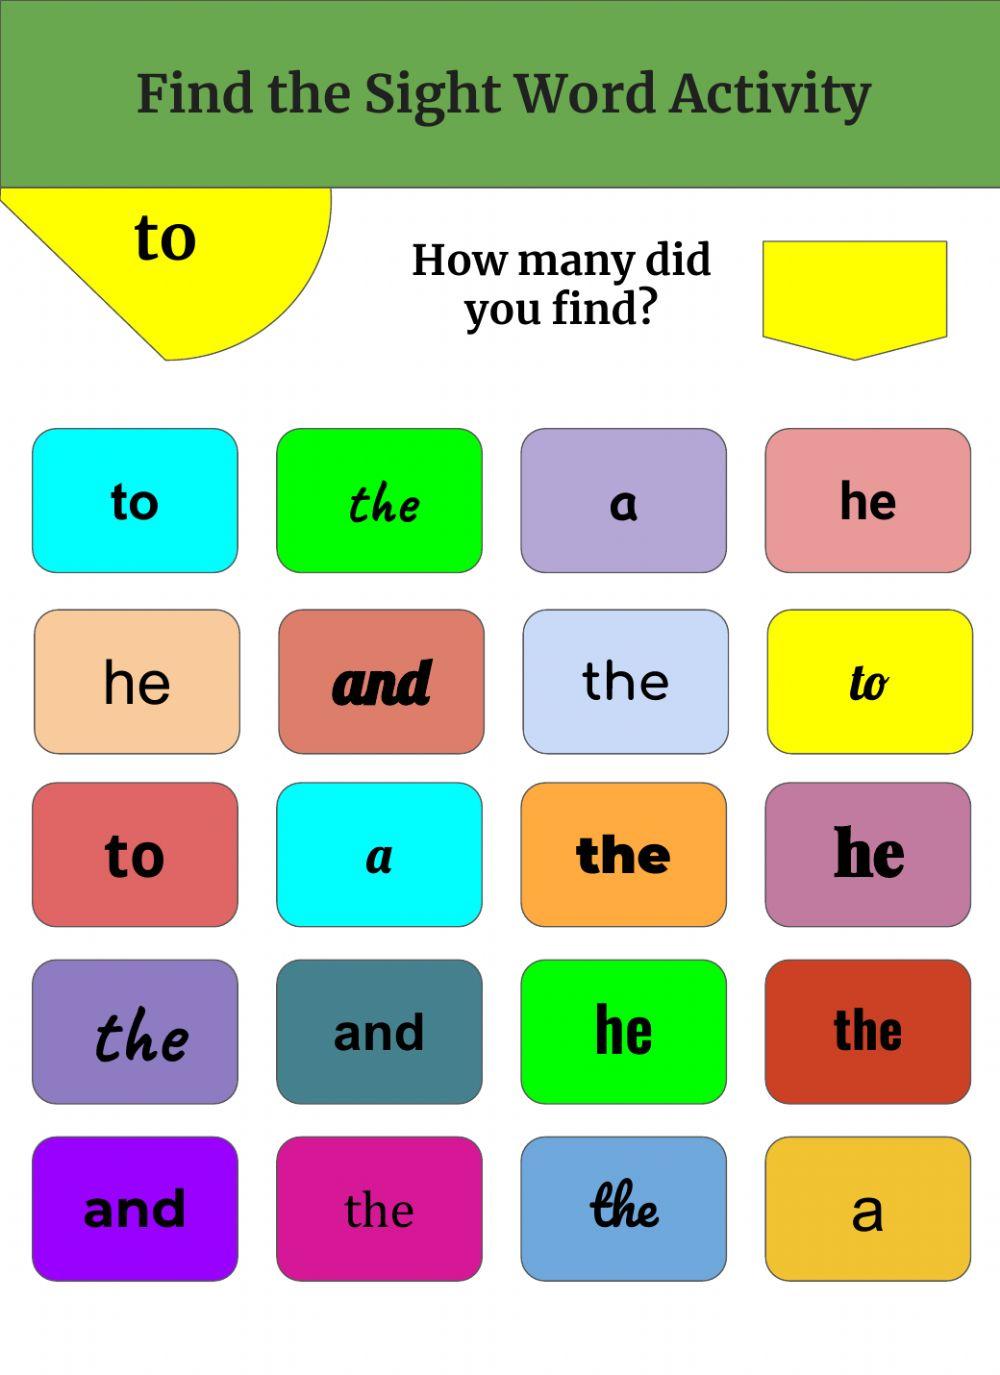 Find the Sight Word